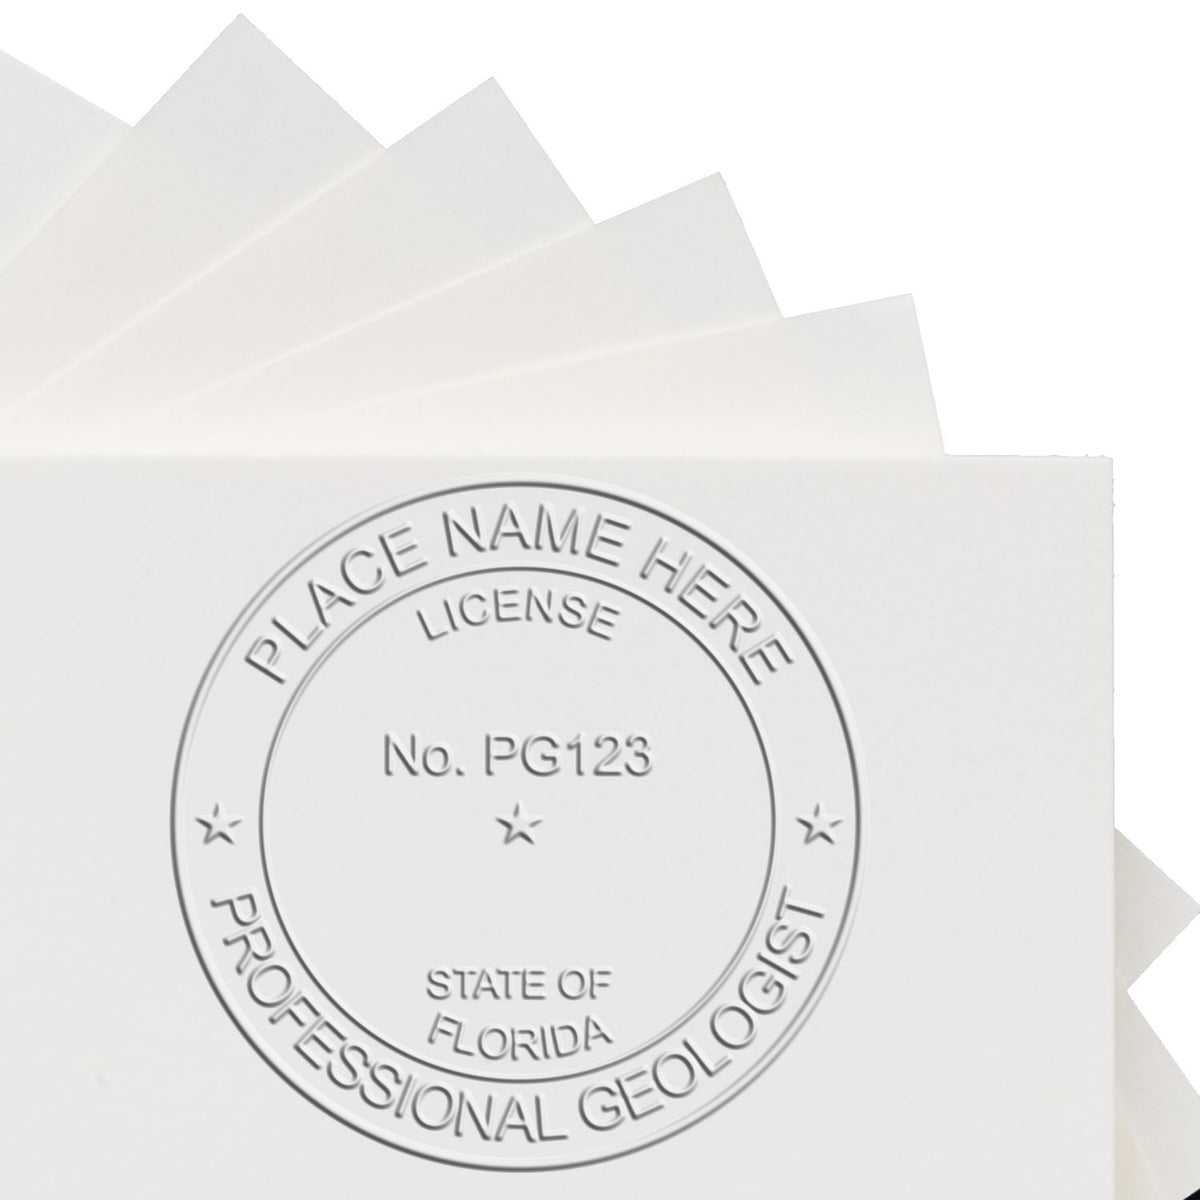 A photograph of the Gift Florida Geologist Seal stamp impression reveals a vivid, professional image of the on paper.